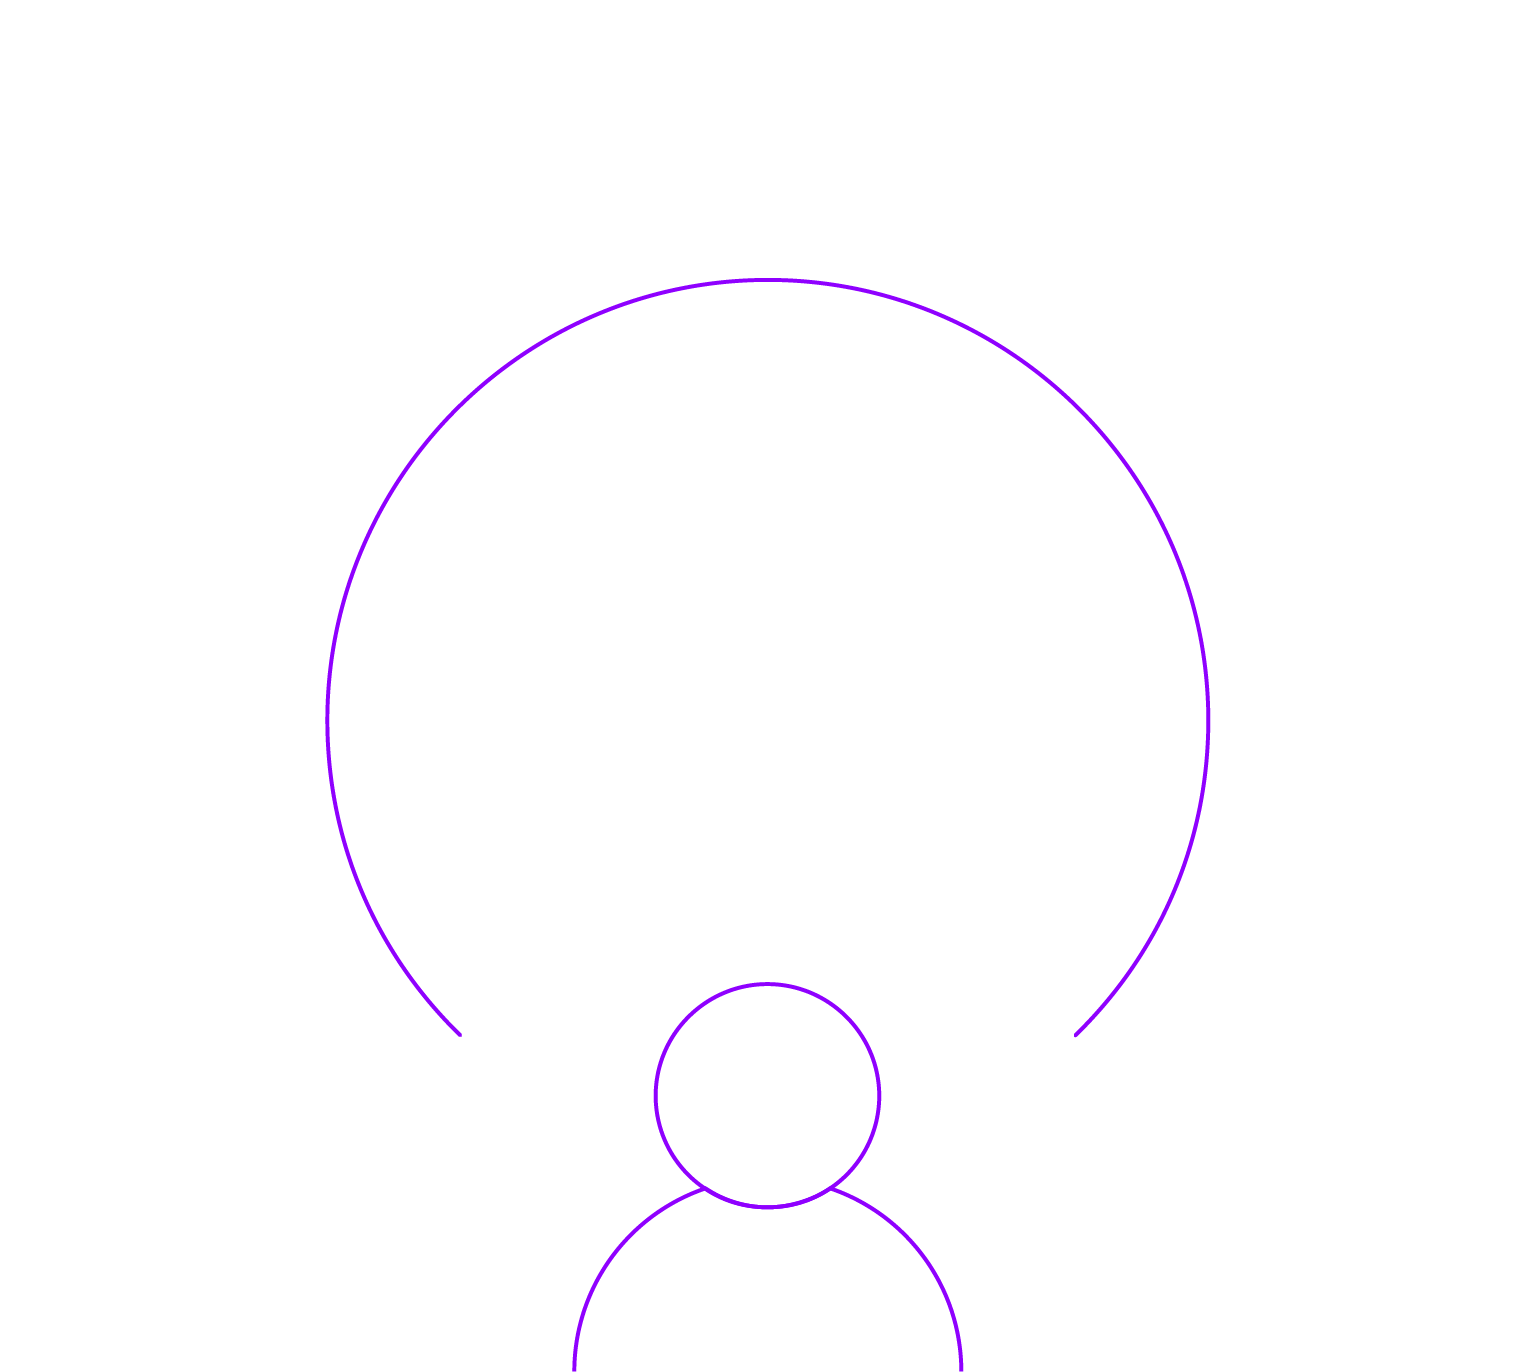 Different touchpoints for conversion